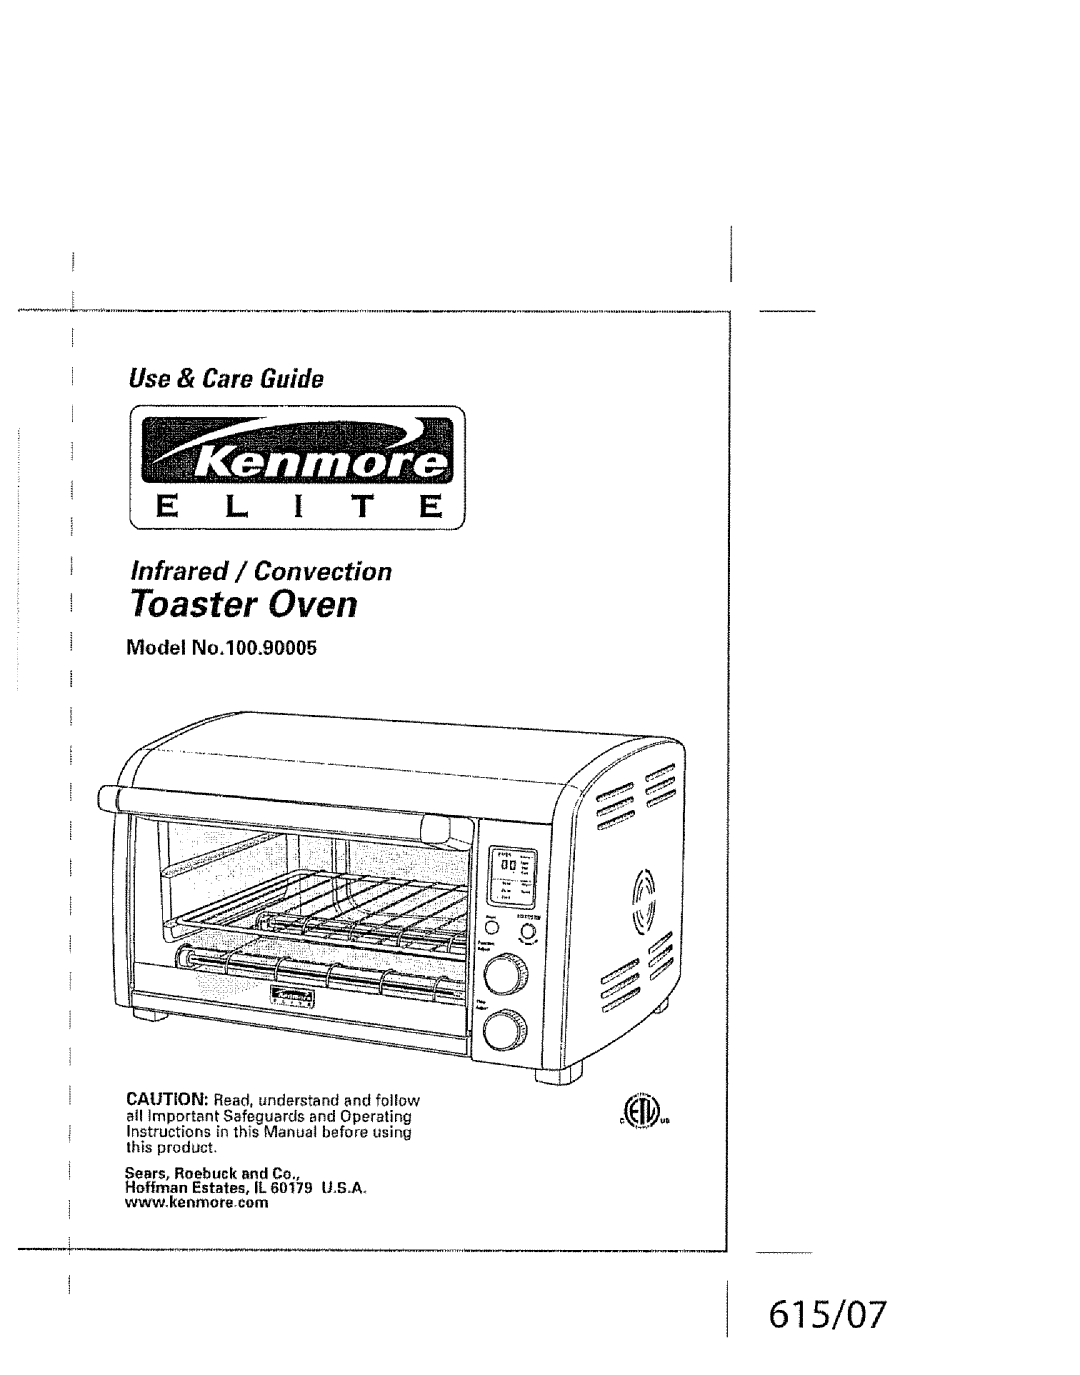 Kenmore manual Toaster Oven, 615/07, E L I T E, Use & Care Guide, Infrared / Convection, Model No,100.90005 